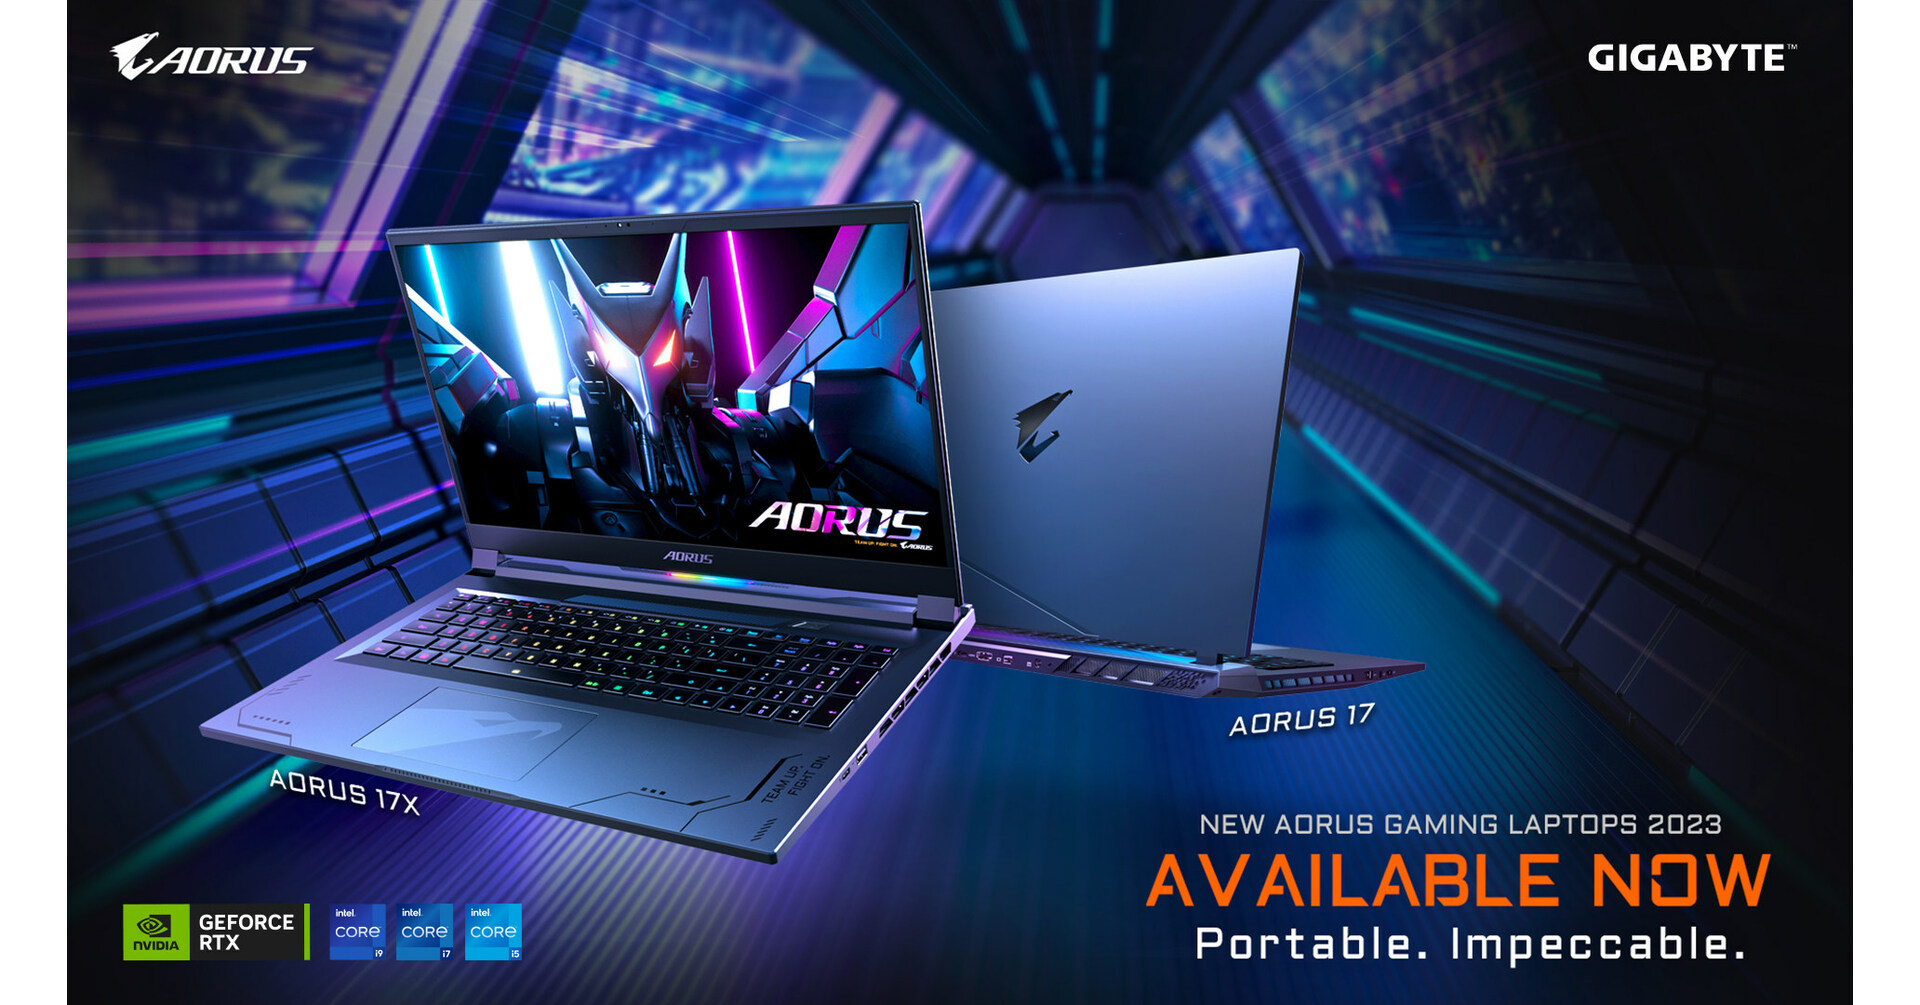 GIGABYTE AORUS 2023 Gaming Laptops Now Available